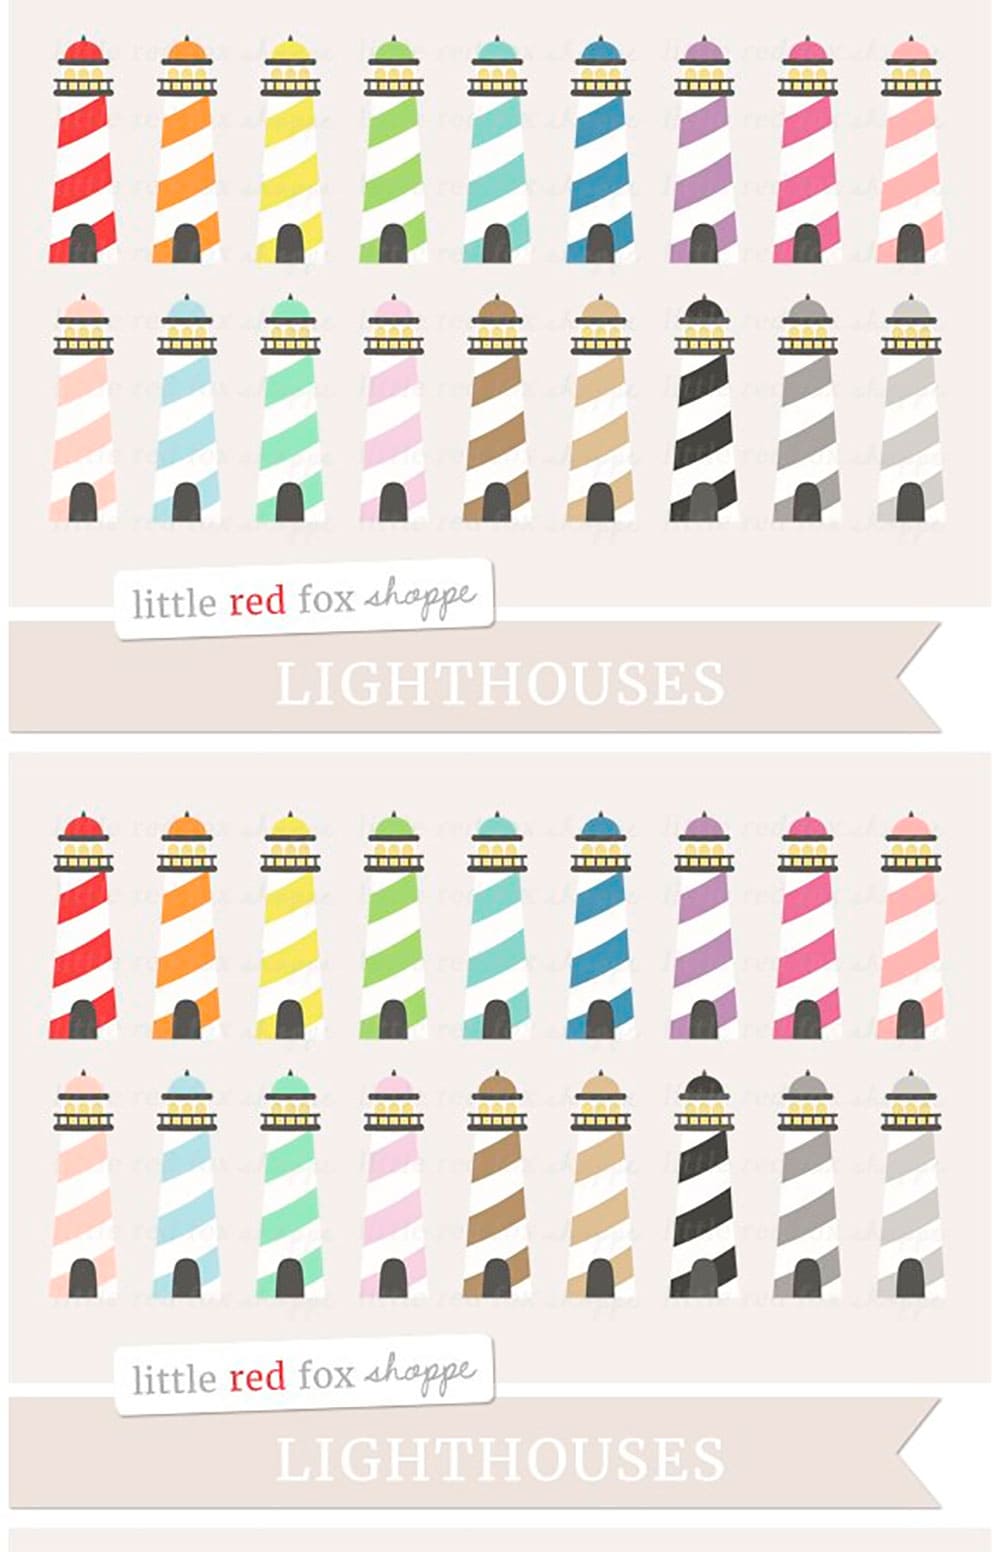 Lighthouse clipart, picture for pinterest.